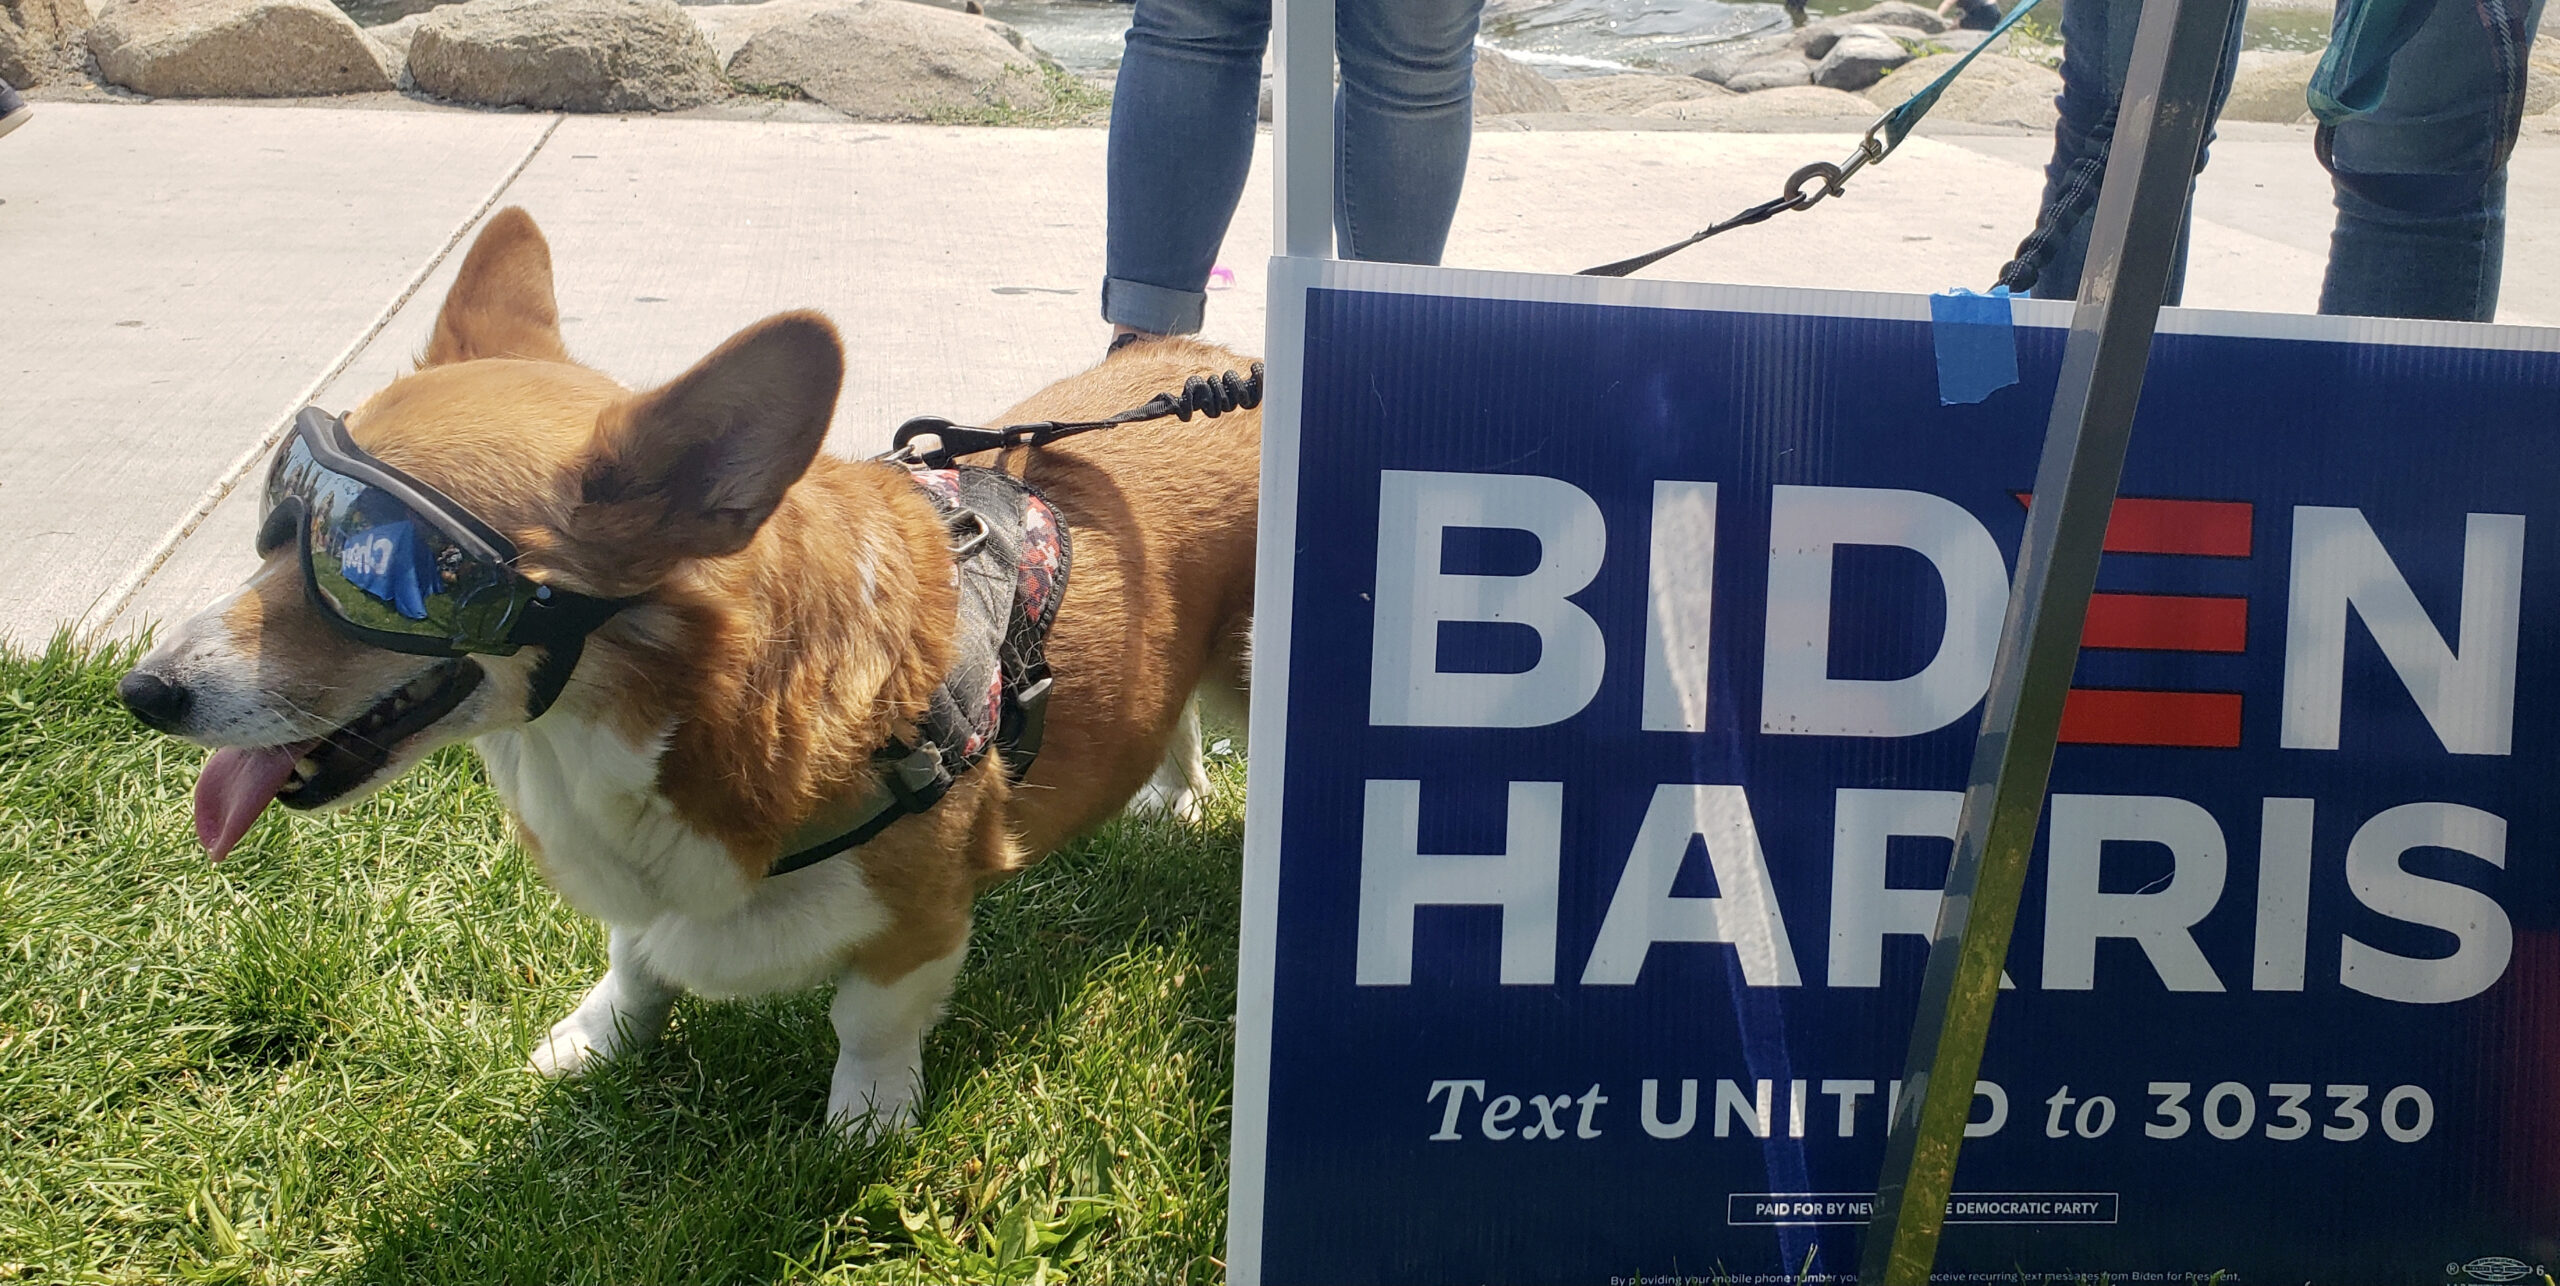 A cute dog with sunglasses stands next to a Biden & Harris campaign sign.